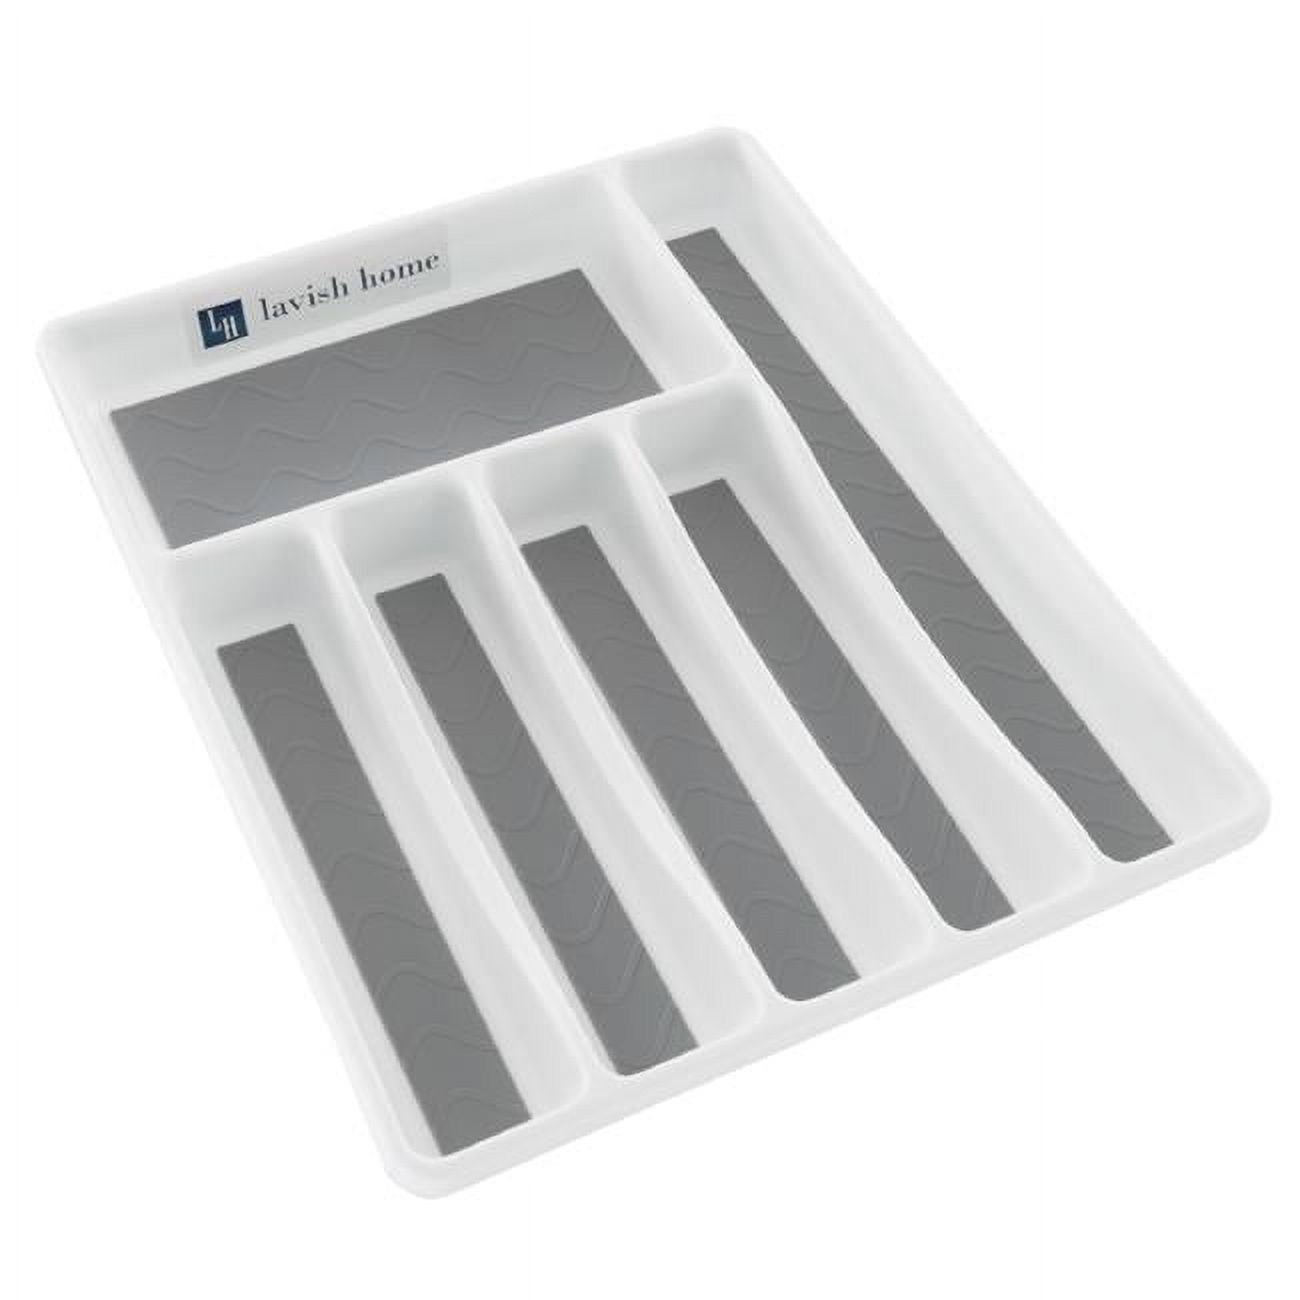 Lavish Home  1.75" Silverware Drawer Organizer with 6 Sections and Nonslip Tray - image 1 of 4